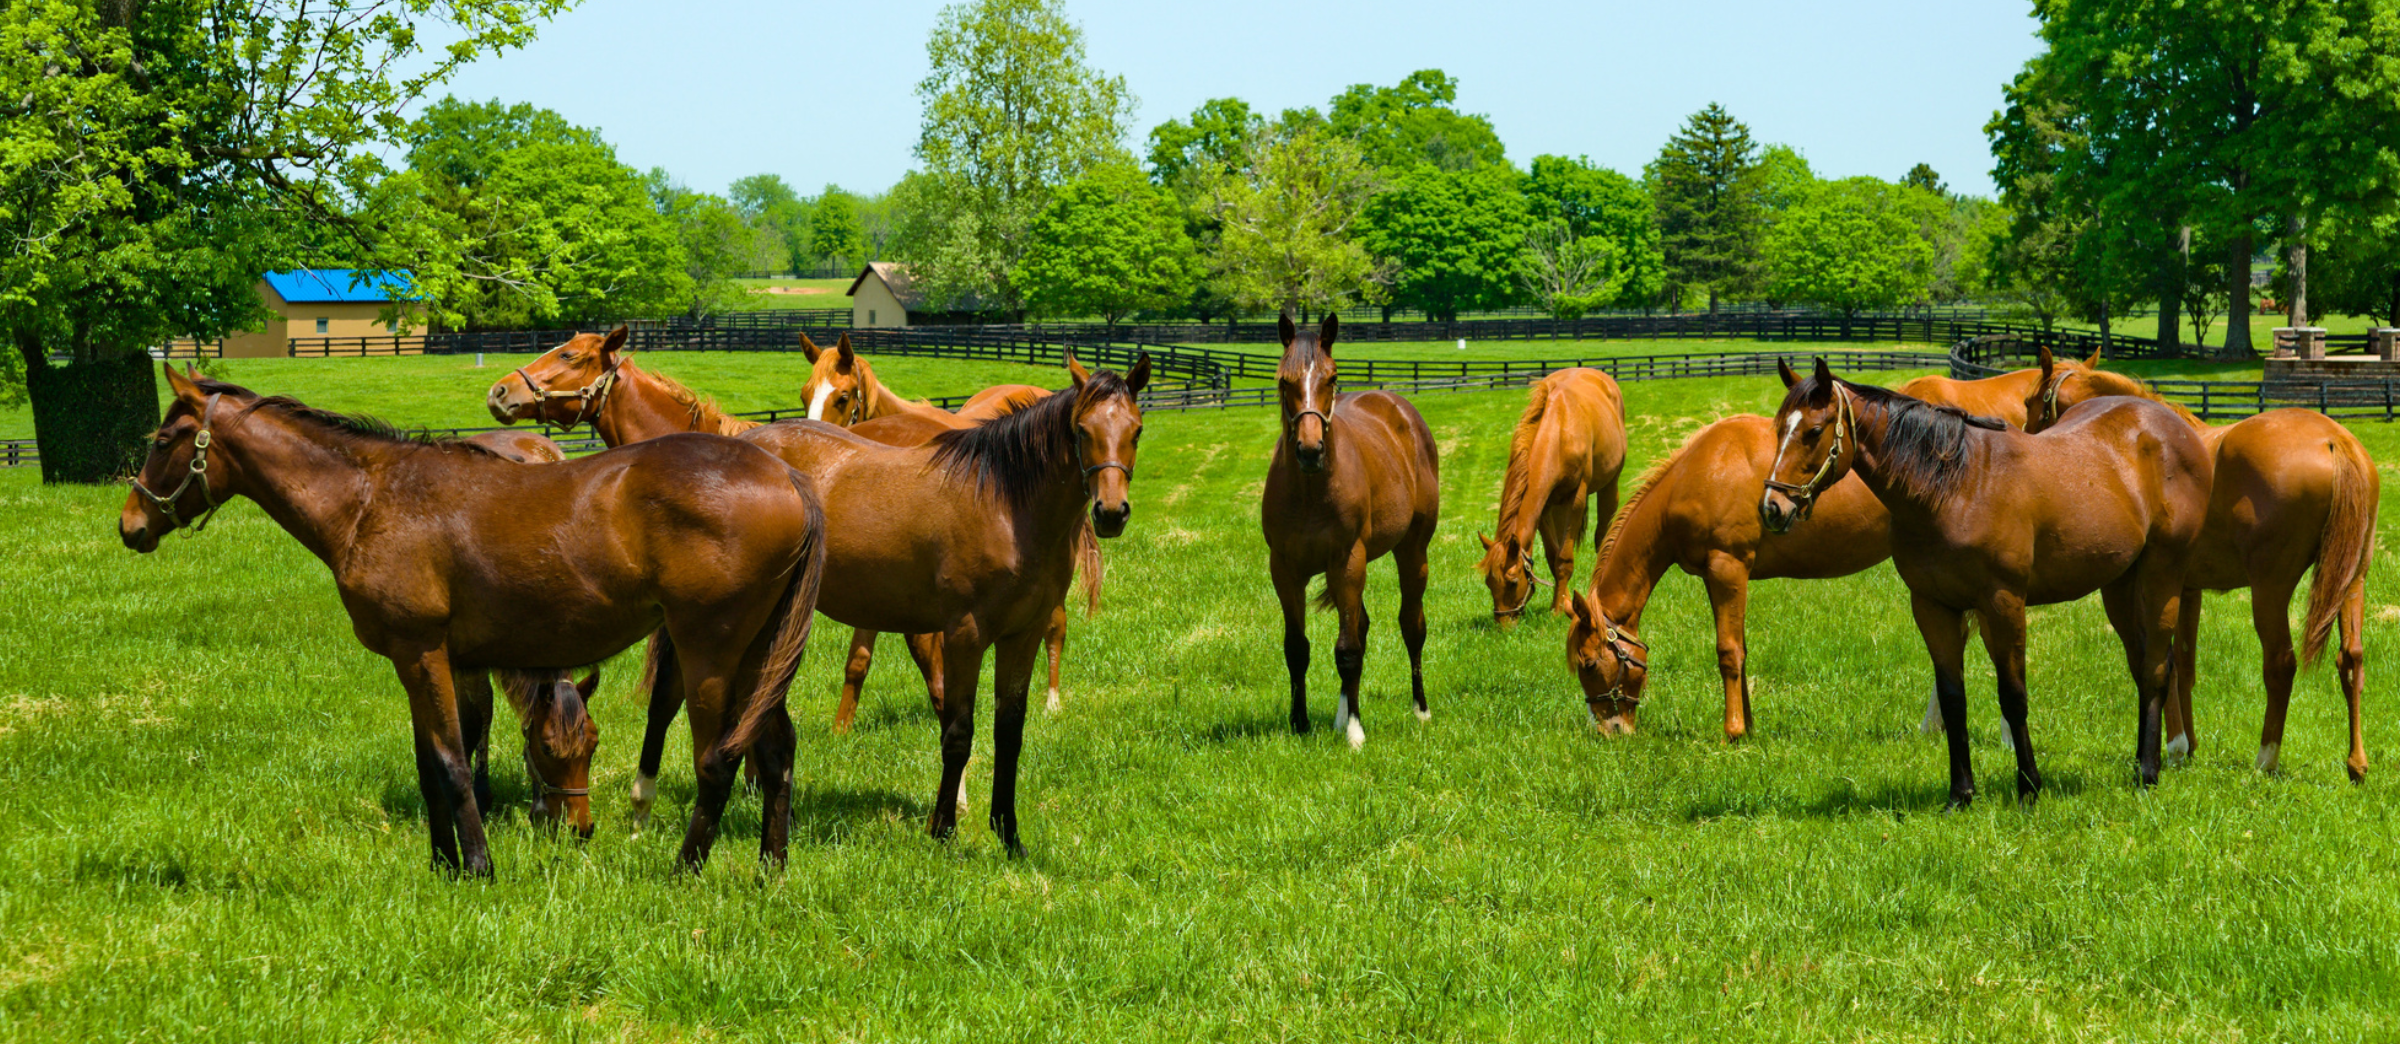 Small herd of young Thoroughbred horses standing in a pasture